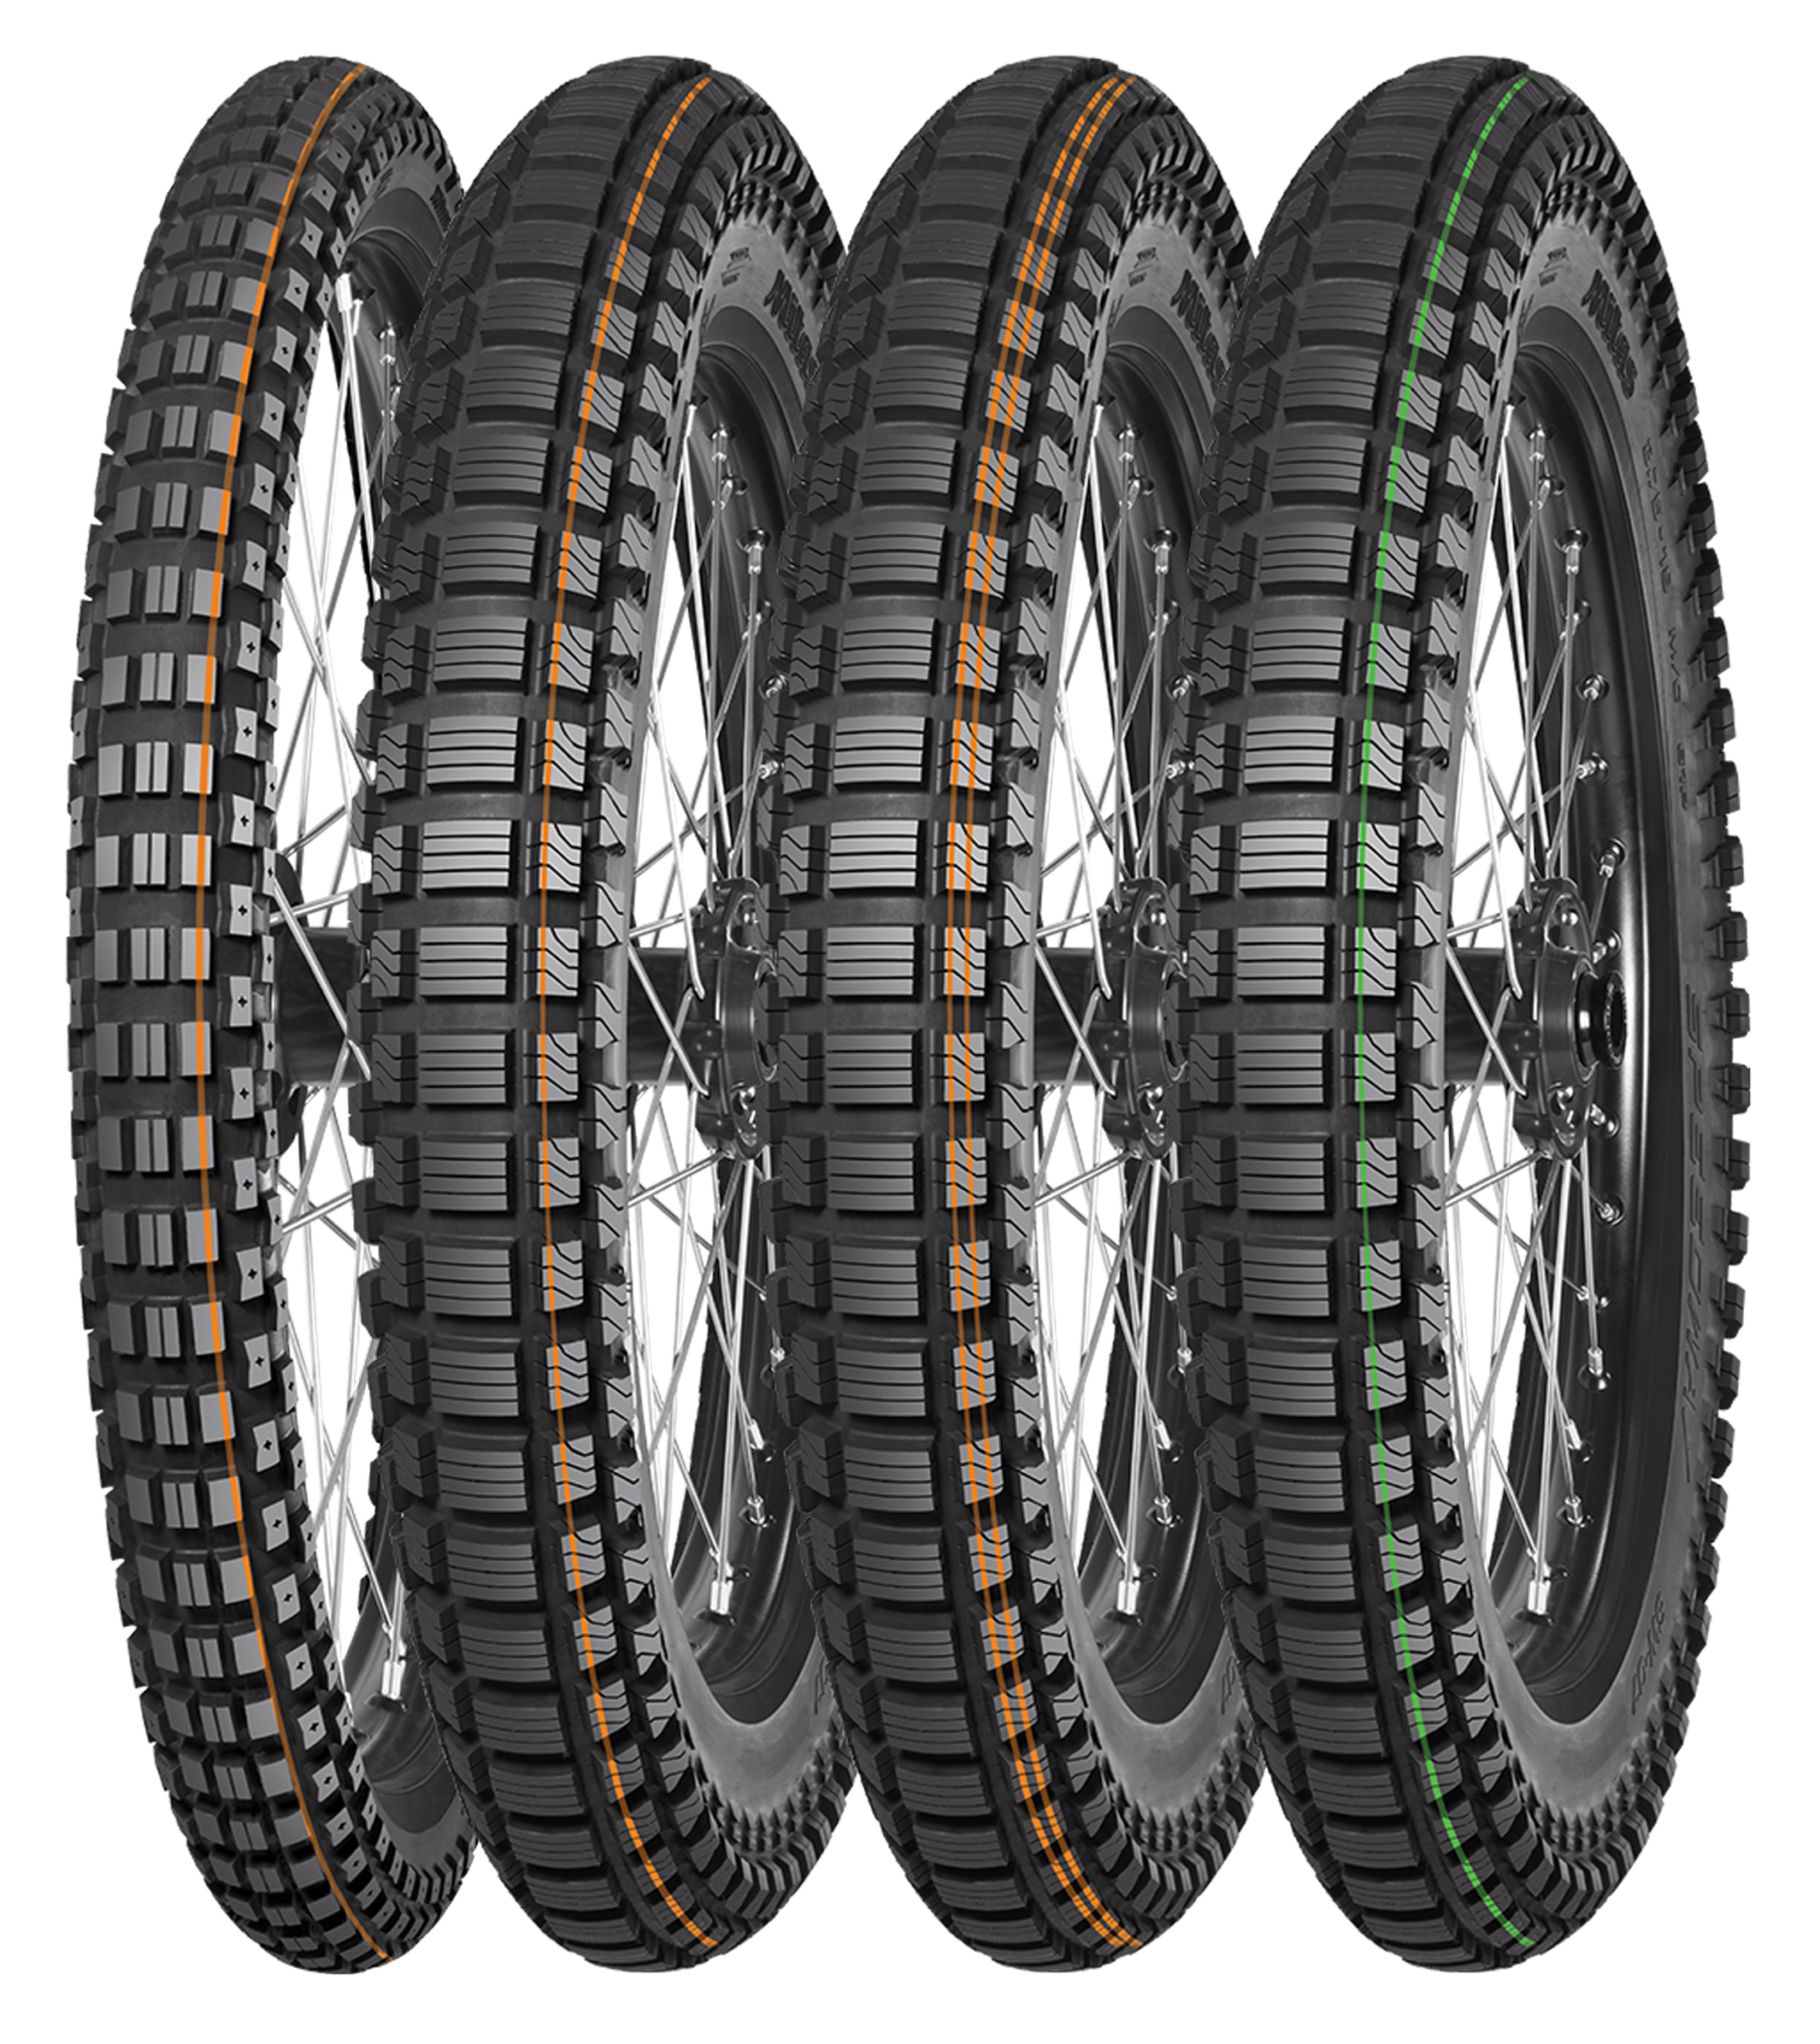 Mitas introduces Speedway, its ‘most advanced tyre to date’